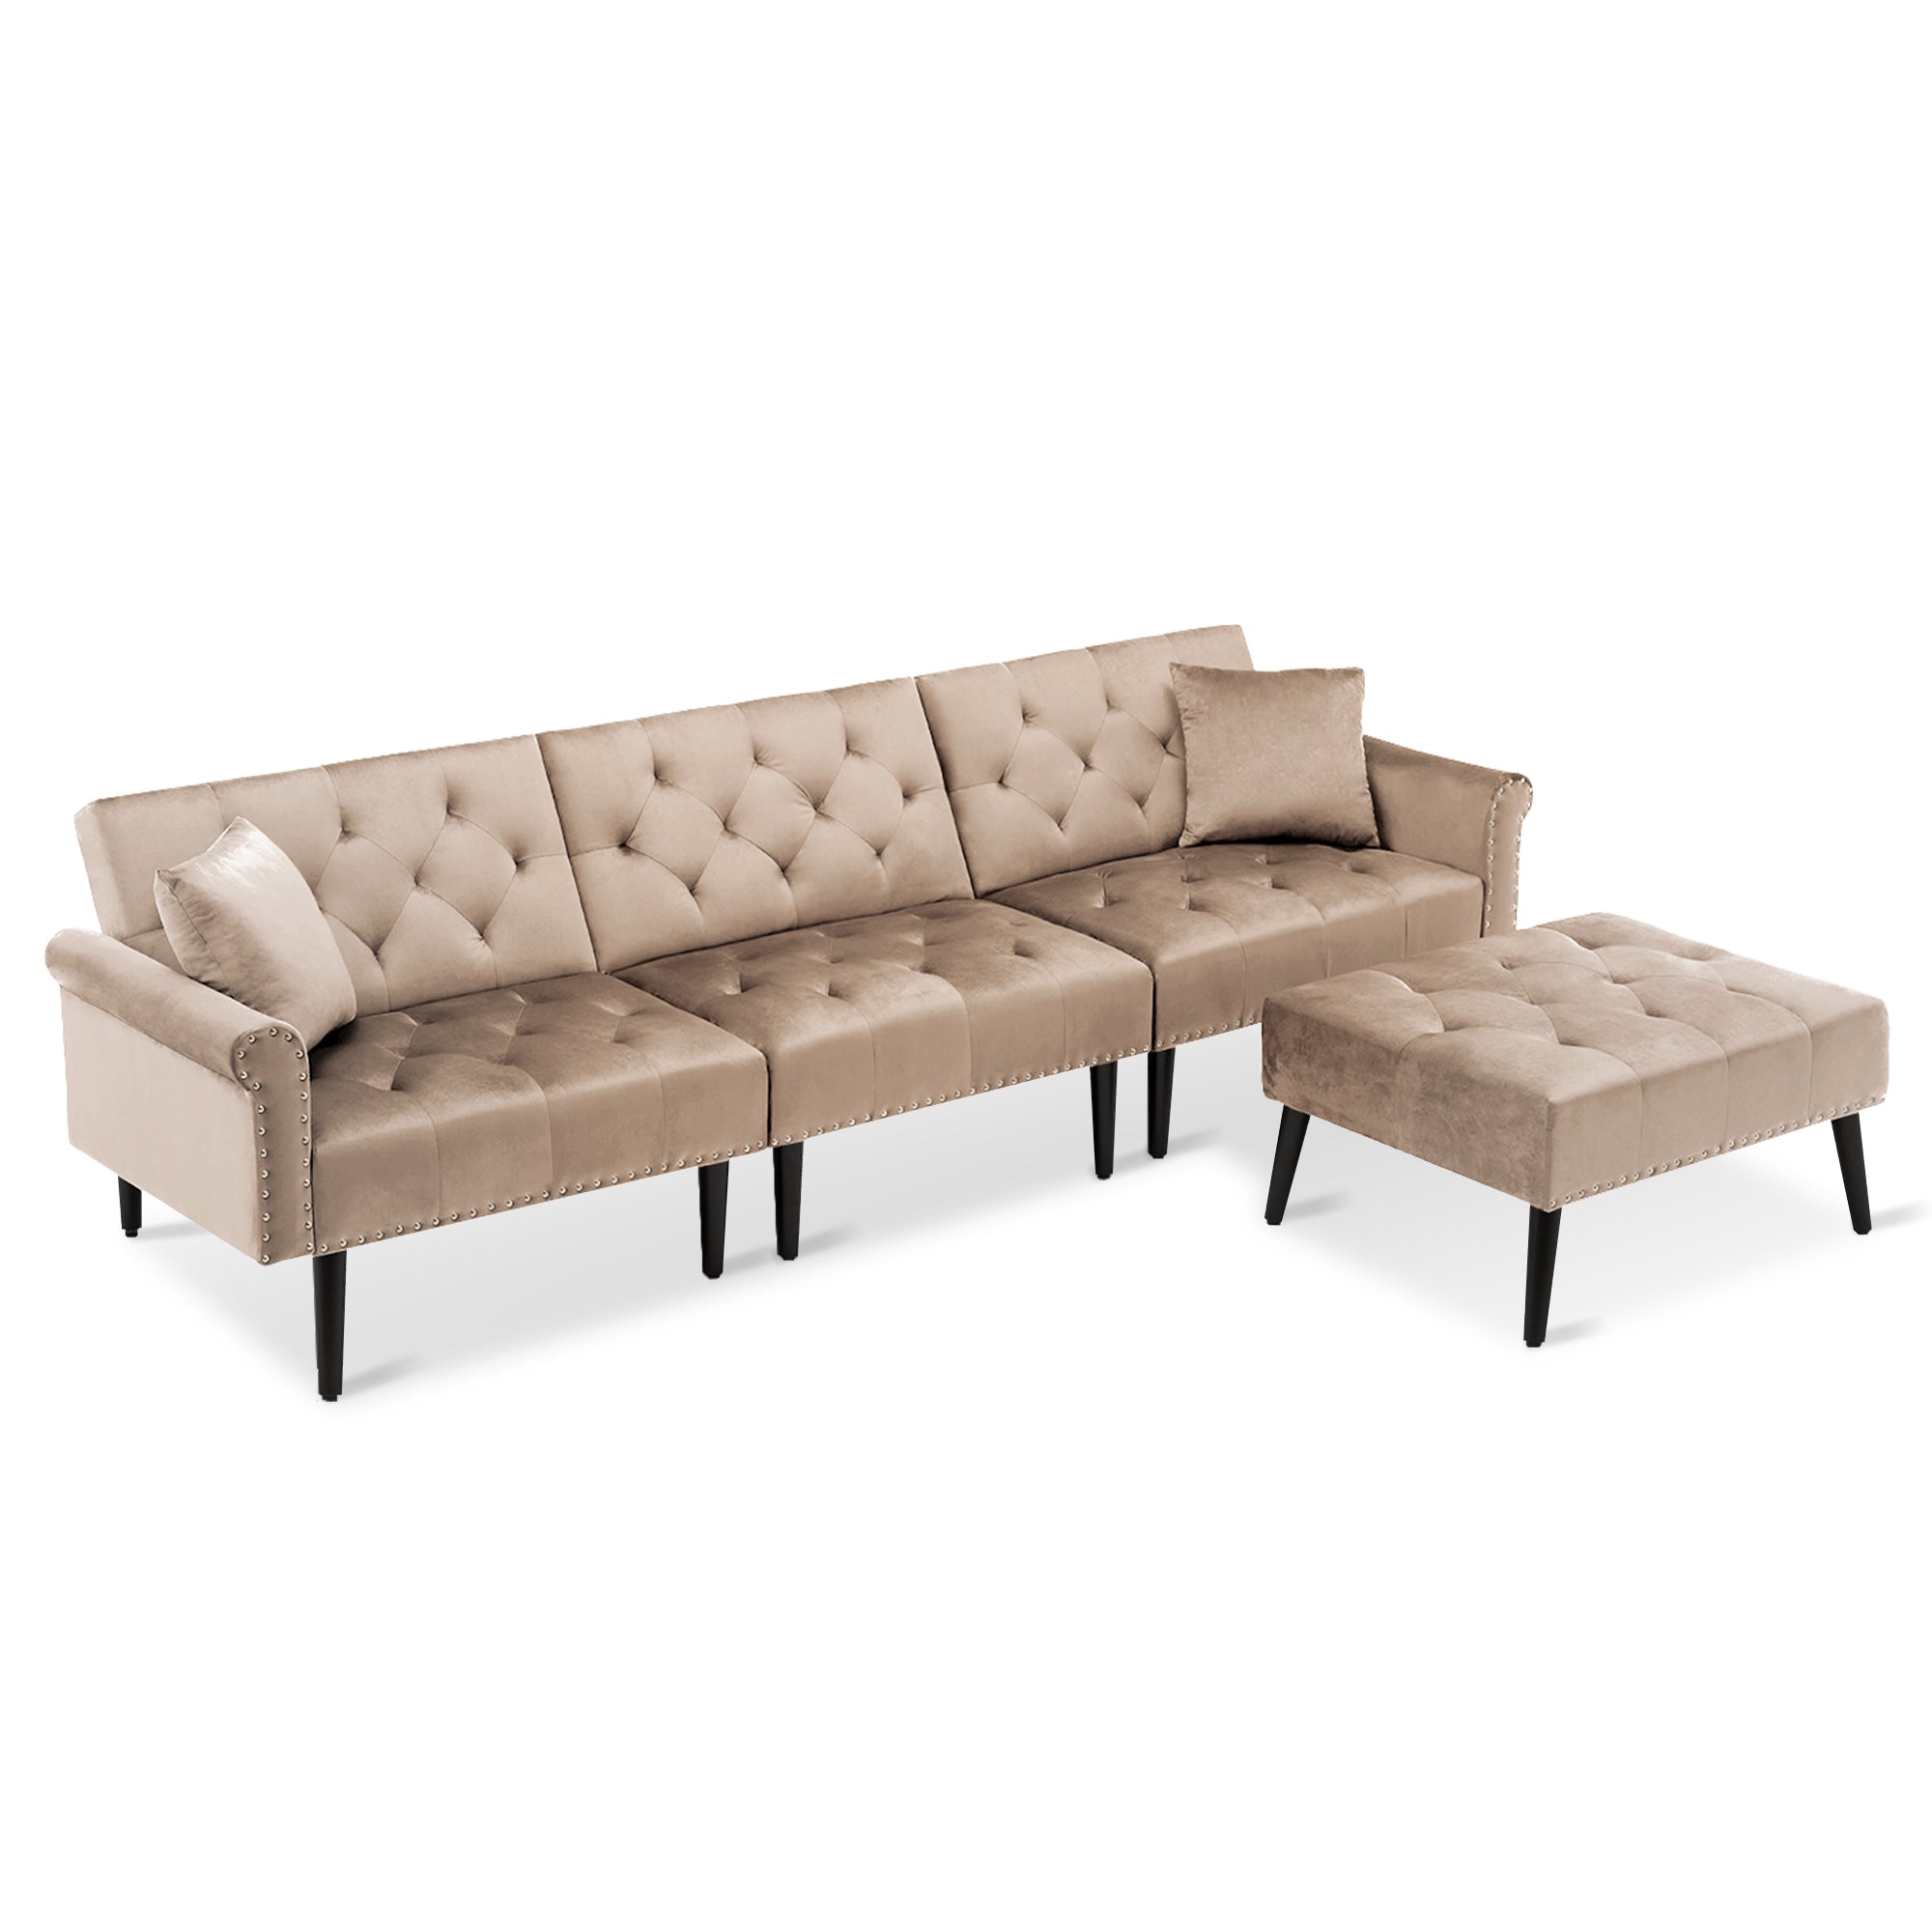 Ivinta Convertible Velvet Sofa Couch, Sectional Sofa with Ottoman, Mid-Century Upholstered Comfy Futon Sofa Bed